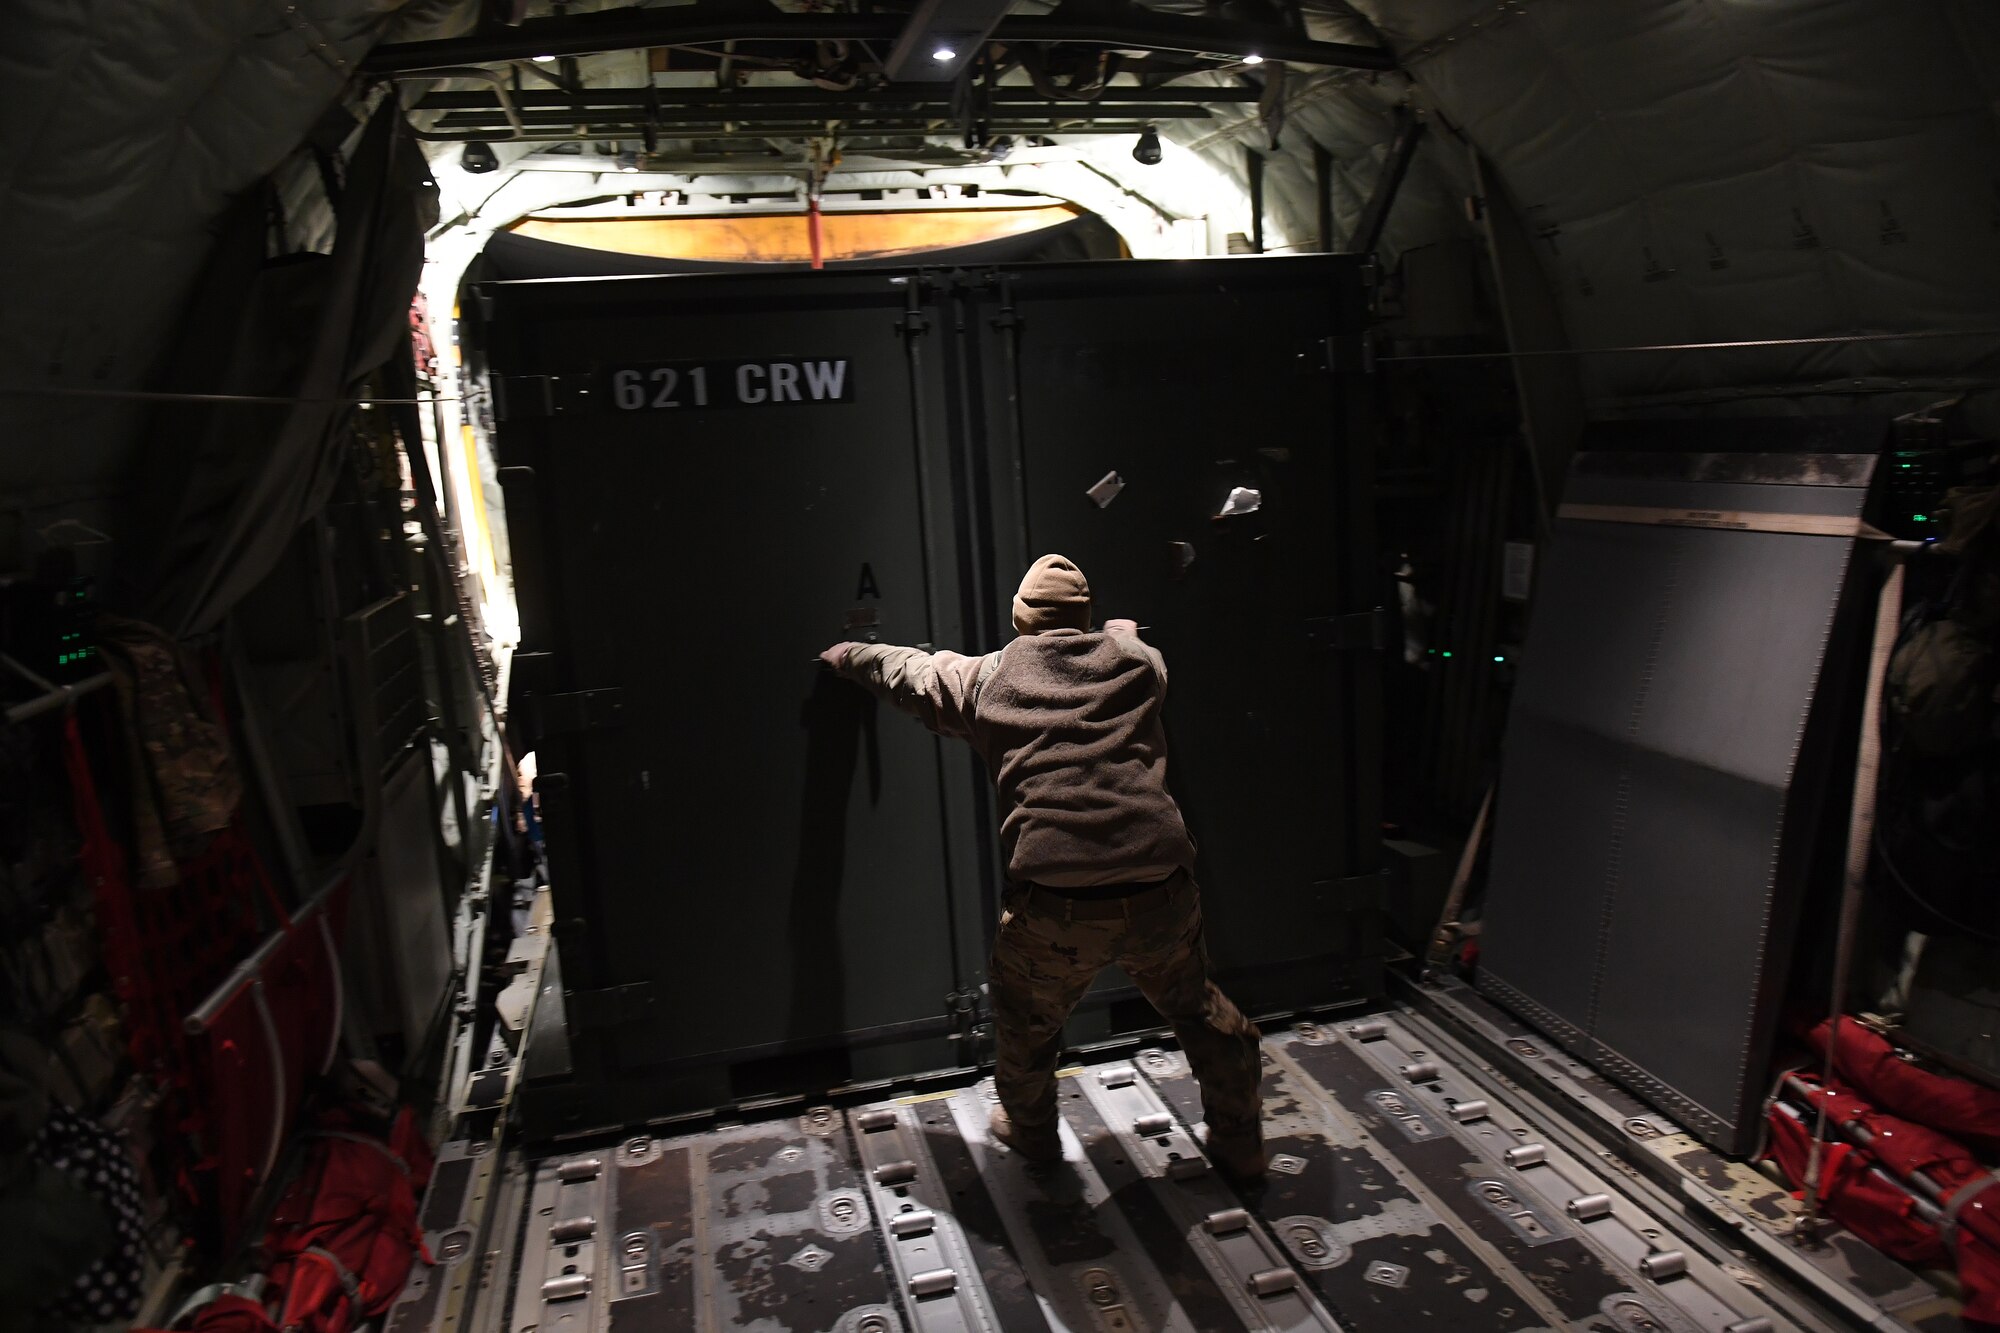 Staff Sgt Tyler Renteria, 41st Airlift Squadron loadmaster, secures a cargo container on a C-130 Hercules aircraft during Green Flag Little Rock exercise, Feb. 9, 2019, at the Joint Readiness Training Center, Fort Polk, La. The primary objective of the exercise is to support the Joint Readiness Training Center and provide the maximum number of airlift crews, mission planners and ground support elements to a simulated combat environment with emphasis on joint force integration. (U.S. Air Force photo by Tech. Sgt. Liliana Moreno)